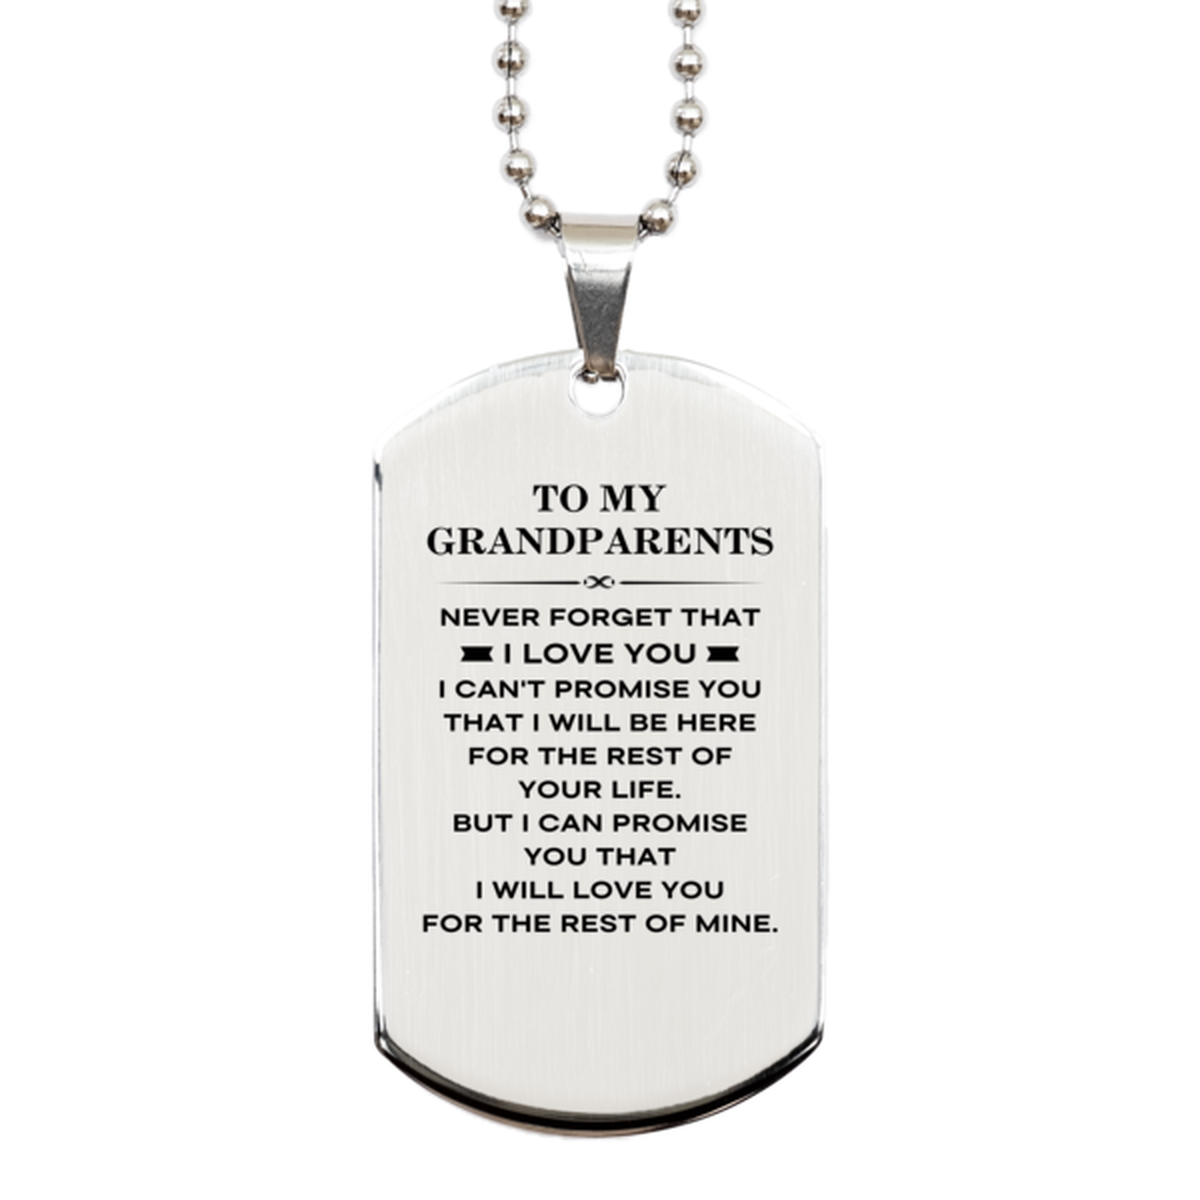 To My Grandparents Gifts, I will love you for the rest of mine, Love Grandparents Dog Tag Necklace, Birthday Christmas Unique Silver Dog Tag For Grandparents